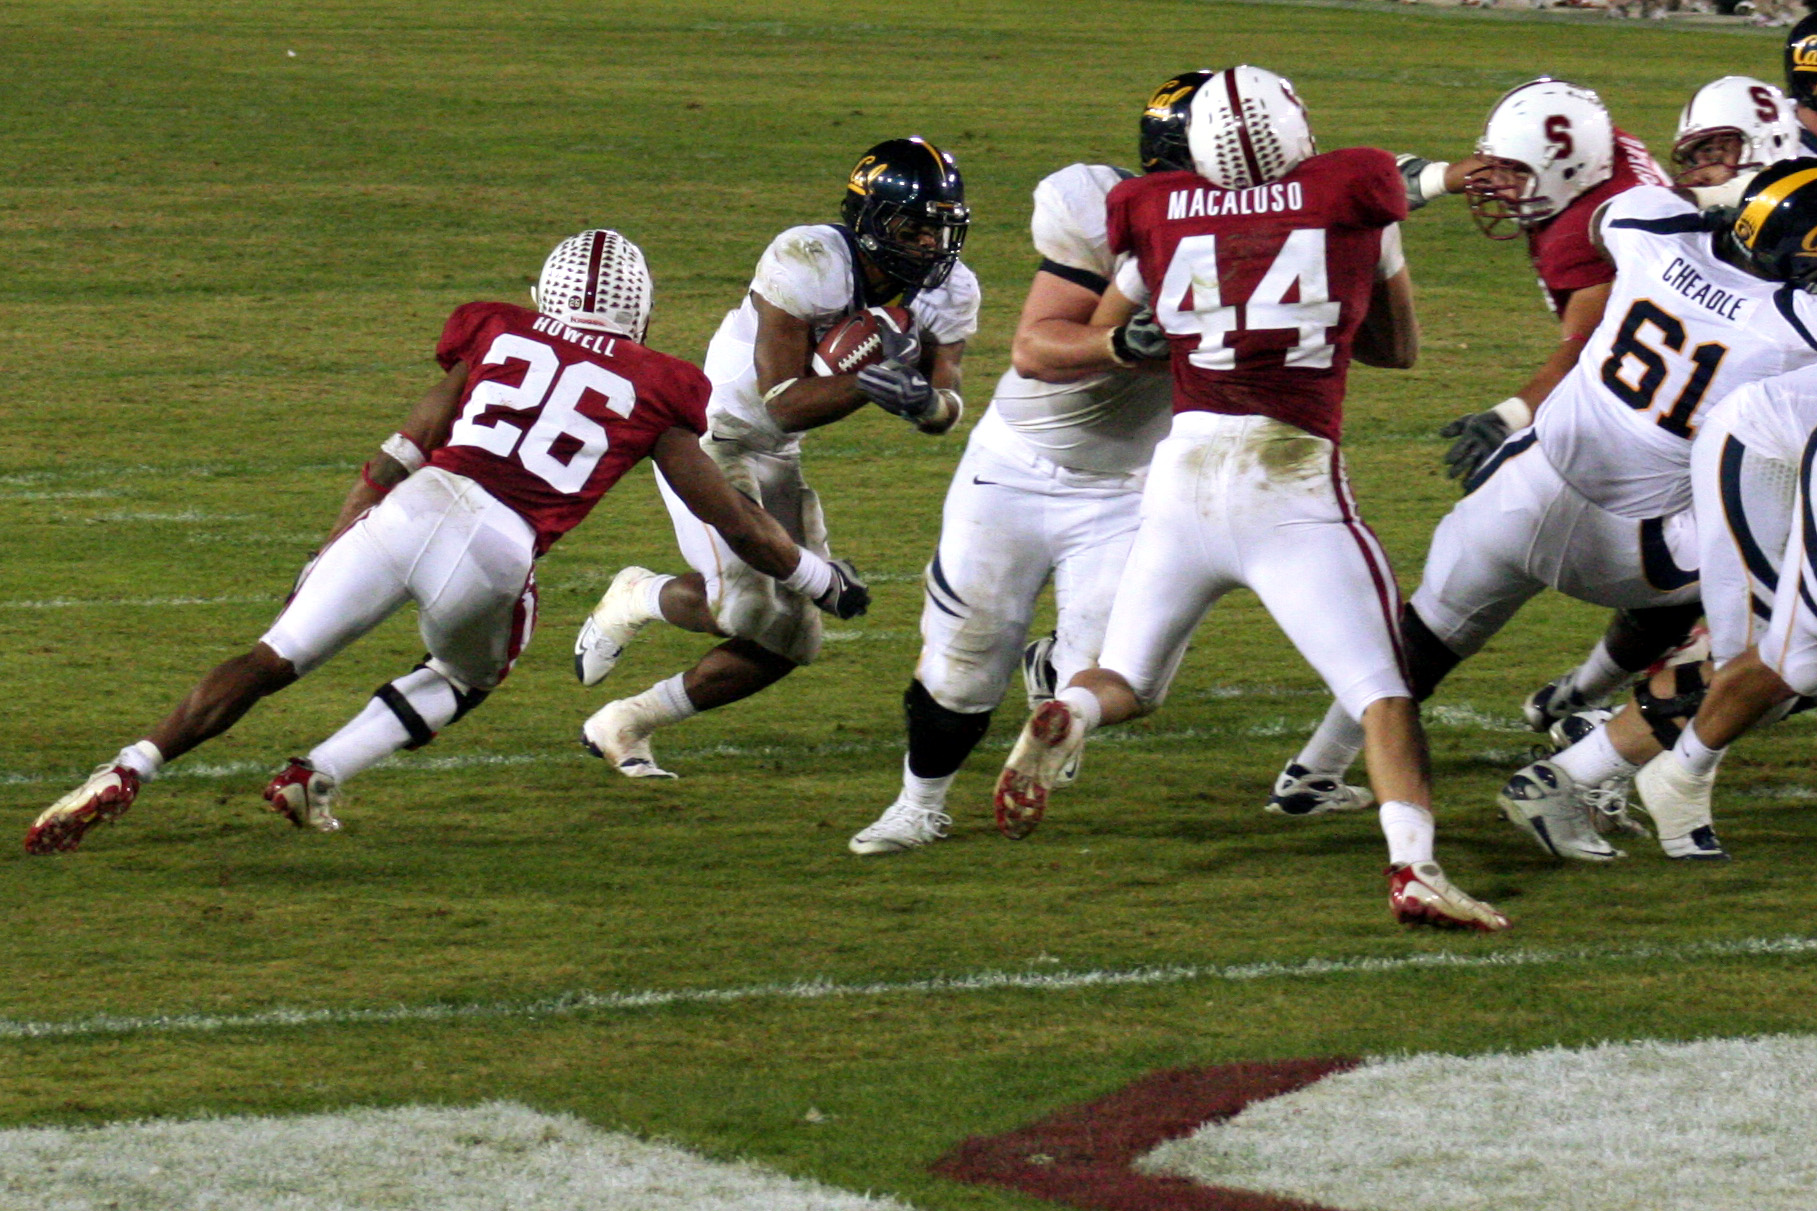 a football game with the opposing team being chased by the opponent